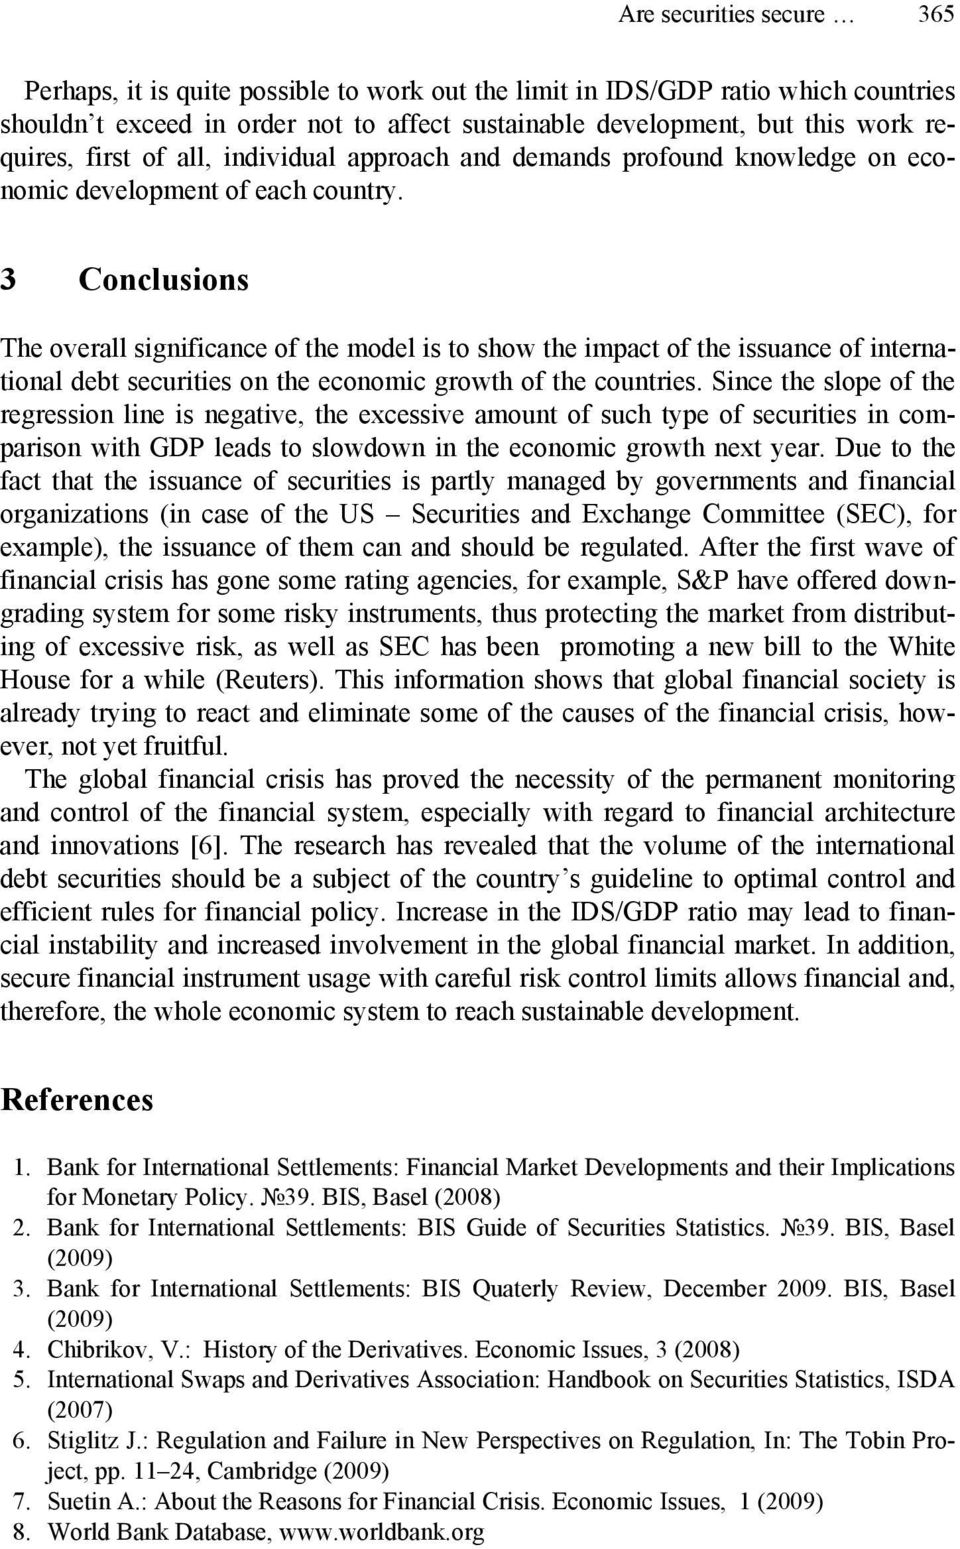 3 Conclusions The overall significance of the model is to show the impact of the issuance of international debt securities on the economic growth of the countries.